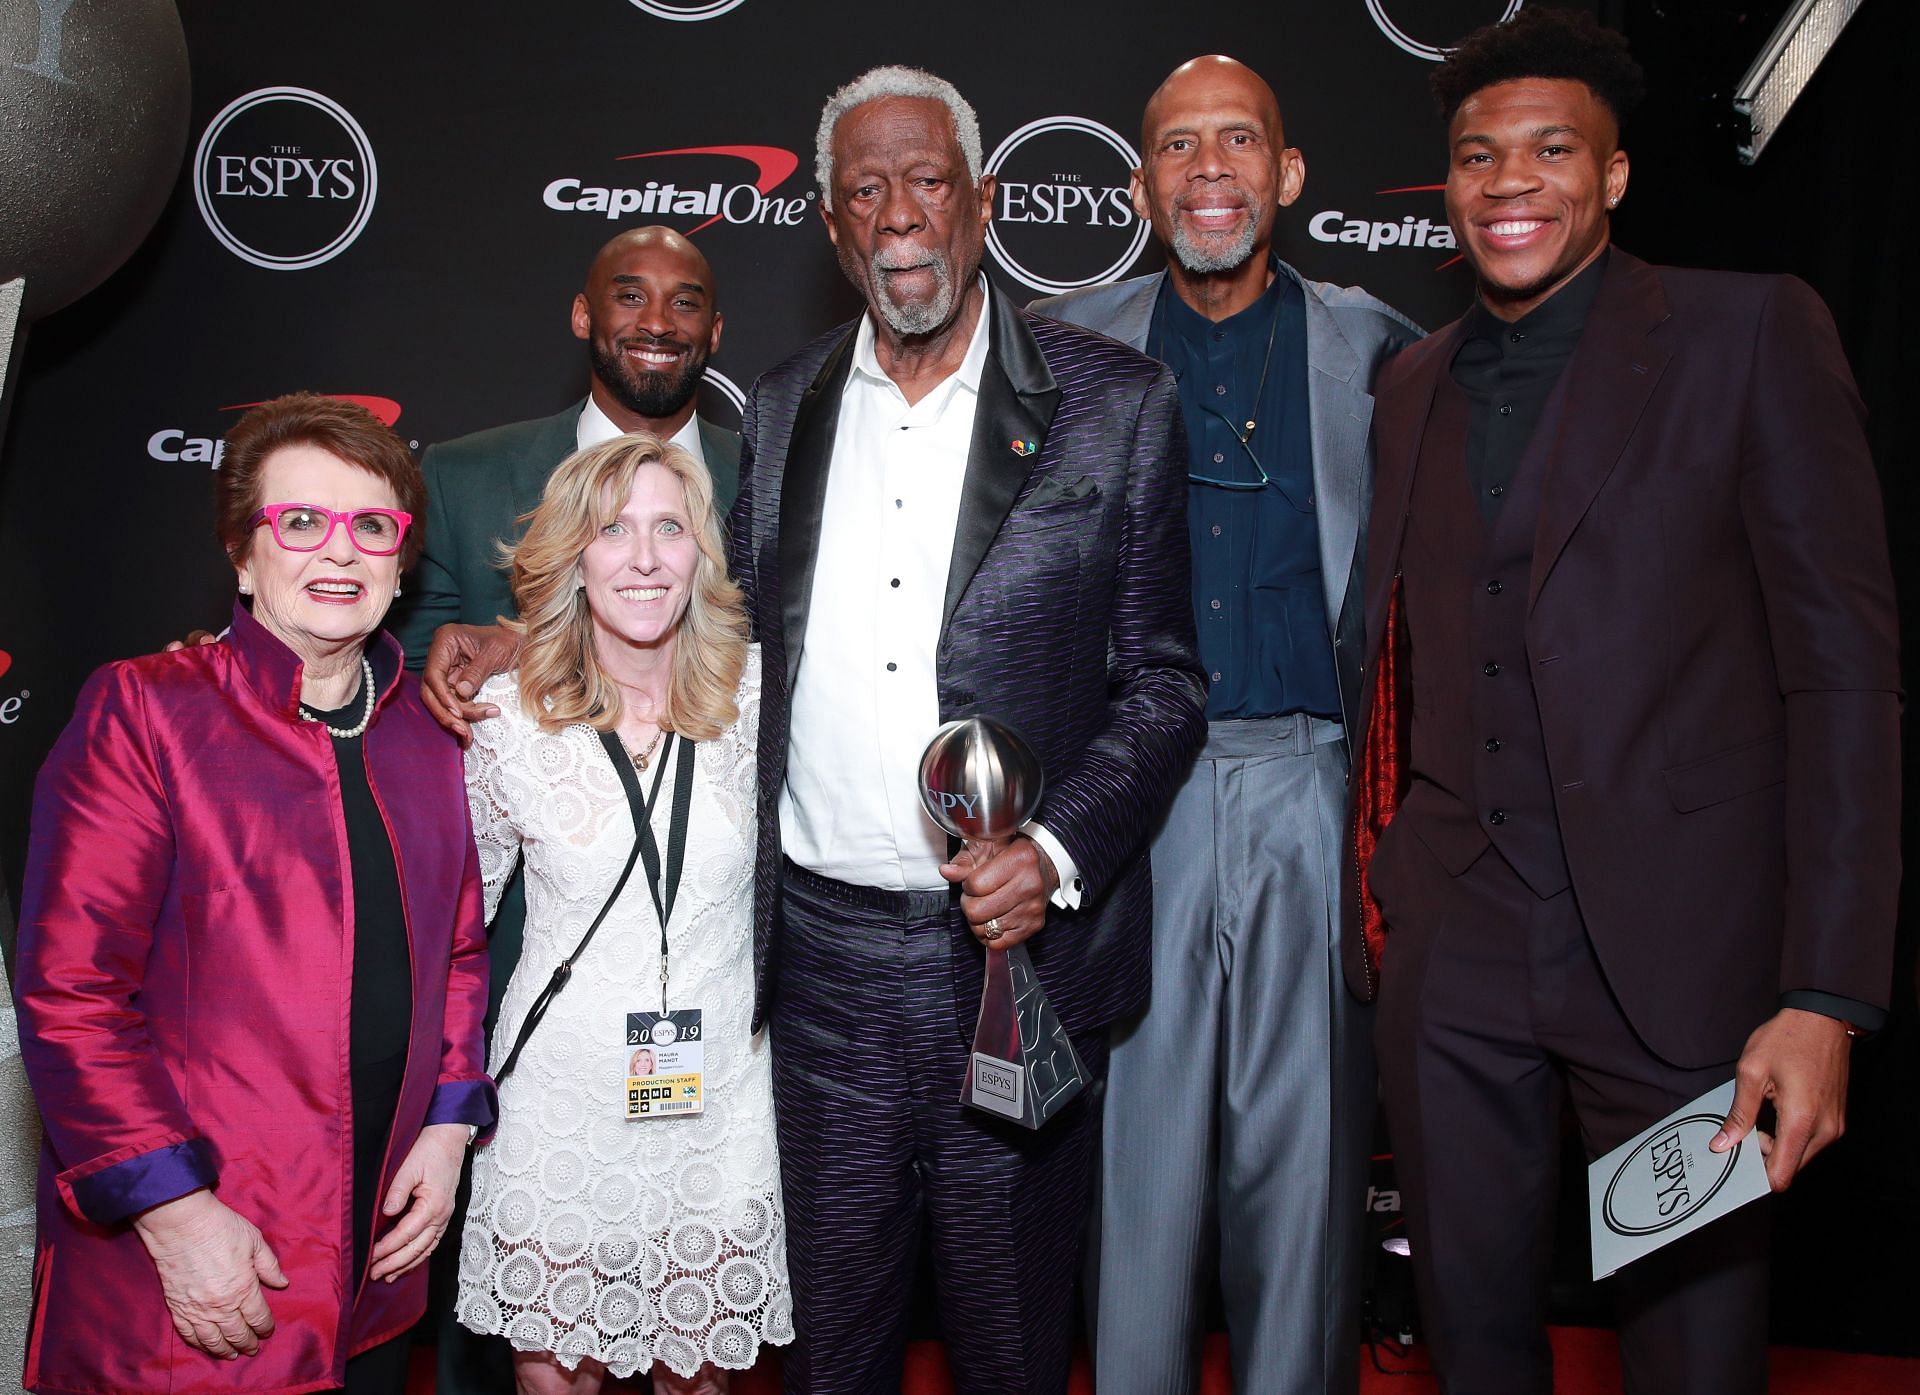 Bill Russell at The 2019 ESPYs - Inside